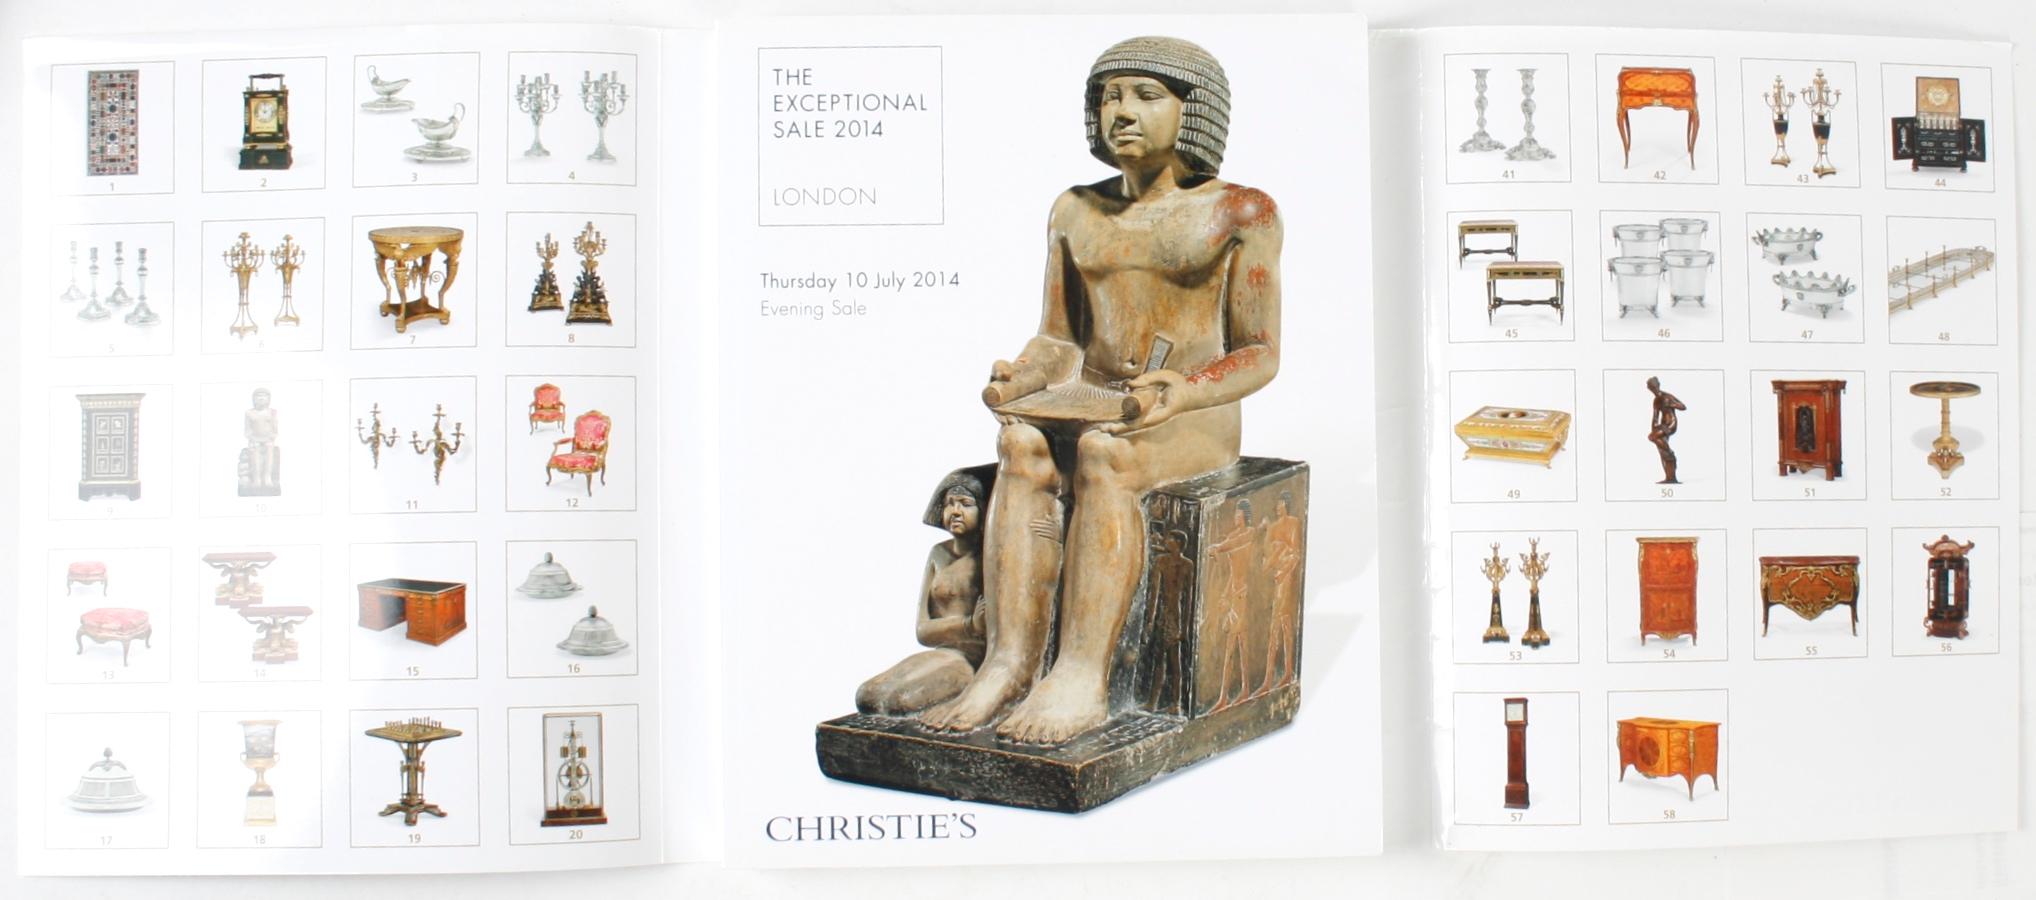 Christie’s Exceptional Sale July 10 2014. Lot 10 is the Northampton Sekhemka, an Egyptian painted limestone statue with an estimate of £4,000,000 – 6,000,000, acquired by Spencer Joshua Alwyne Compton, 2nd Marquess of Northampton, in Egypt between